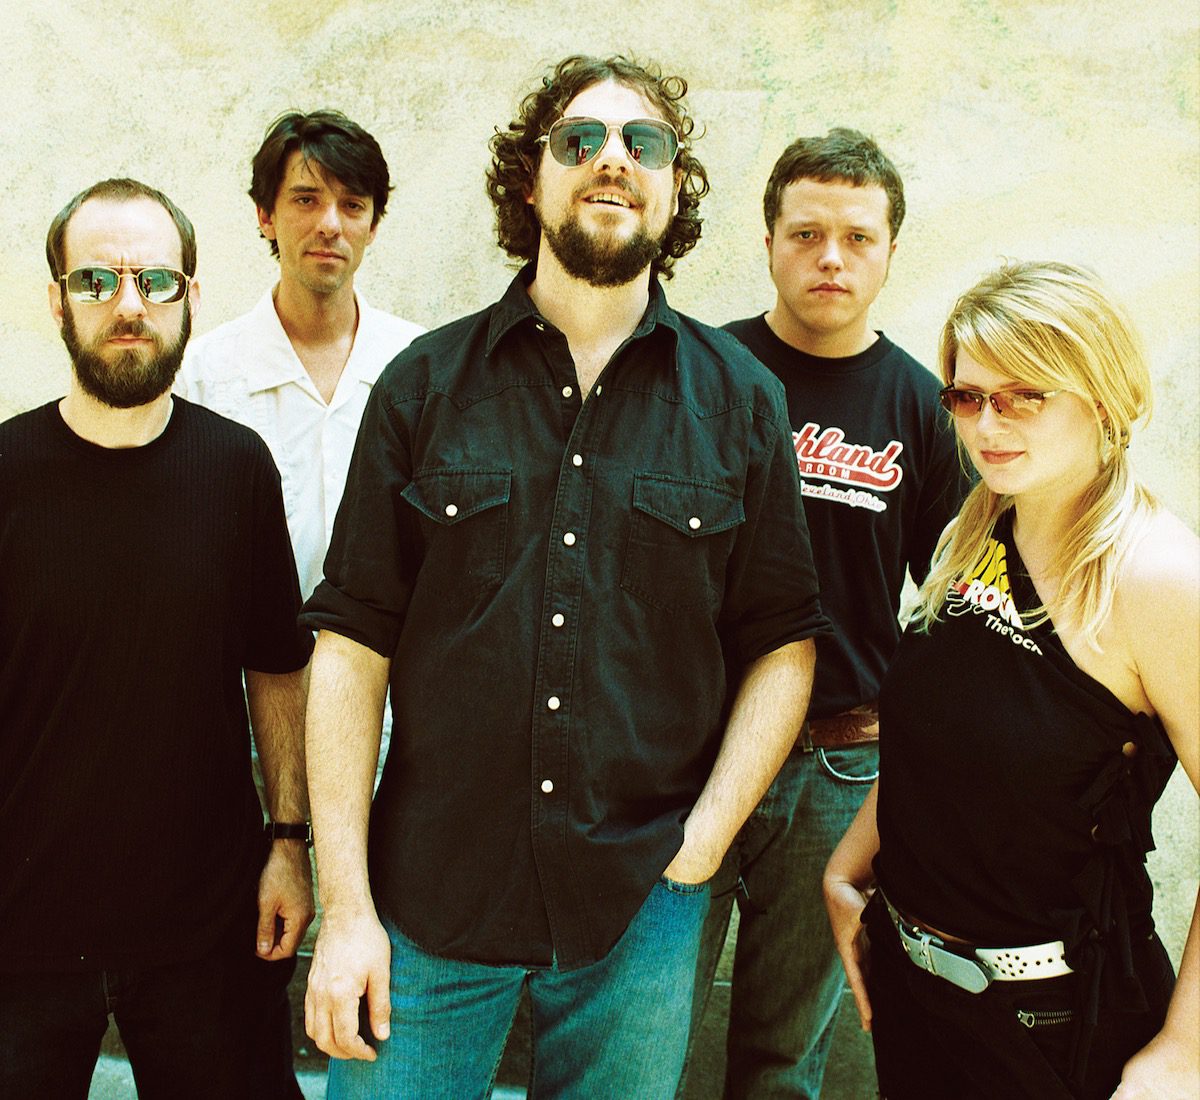 The five members of Dirty South era Drive-by Truckers